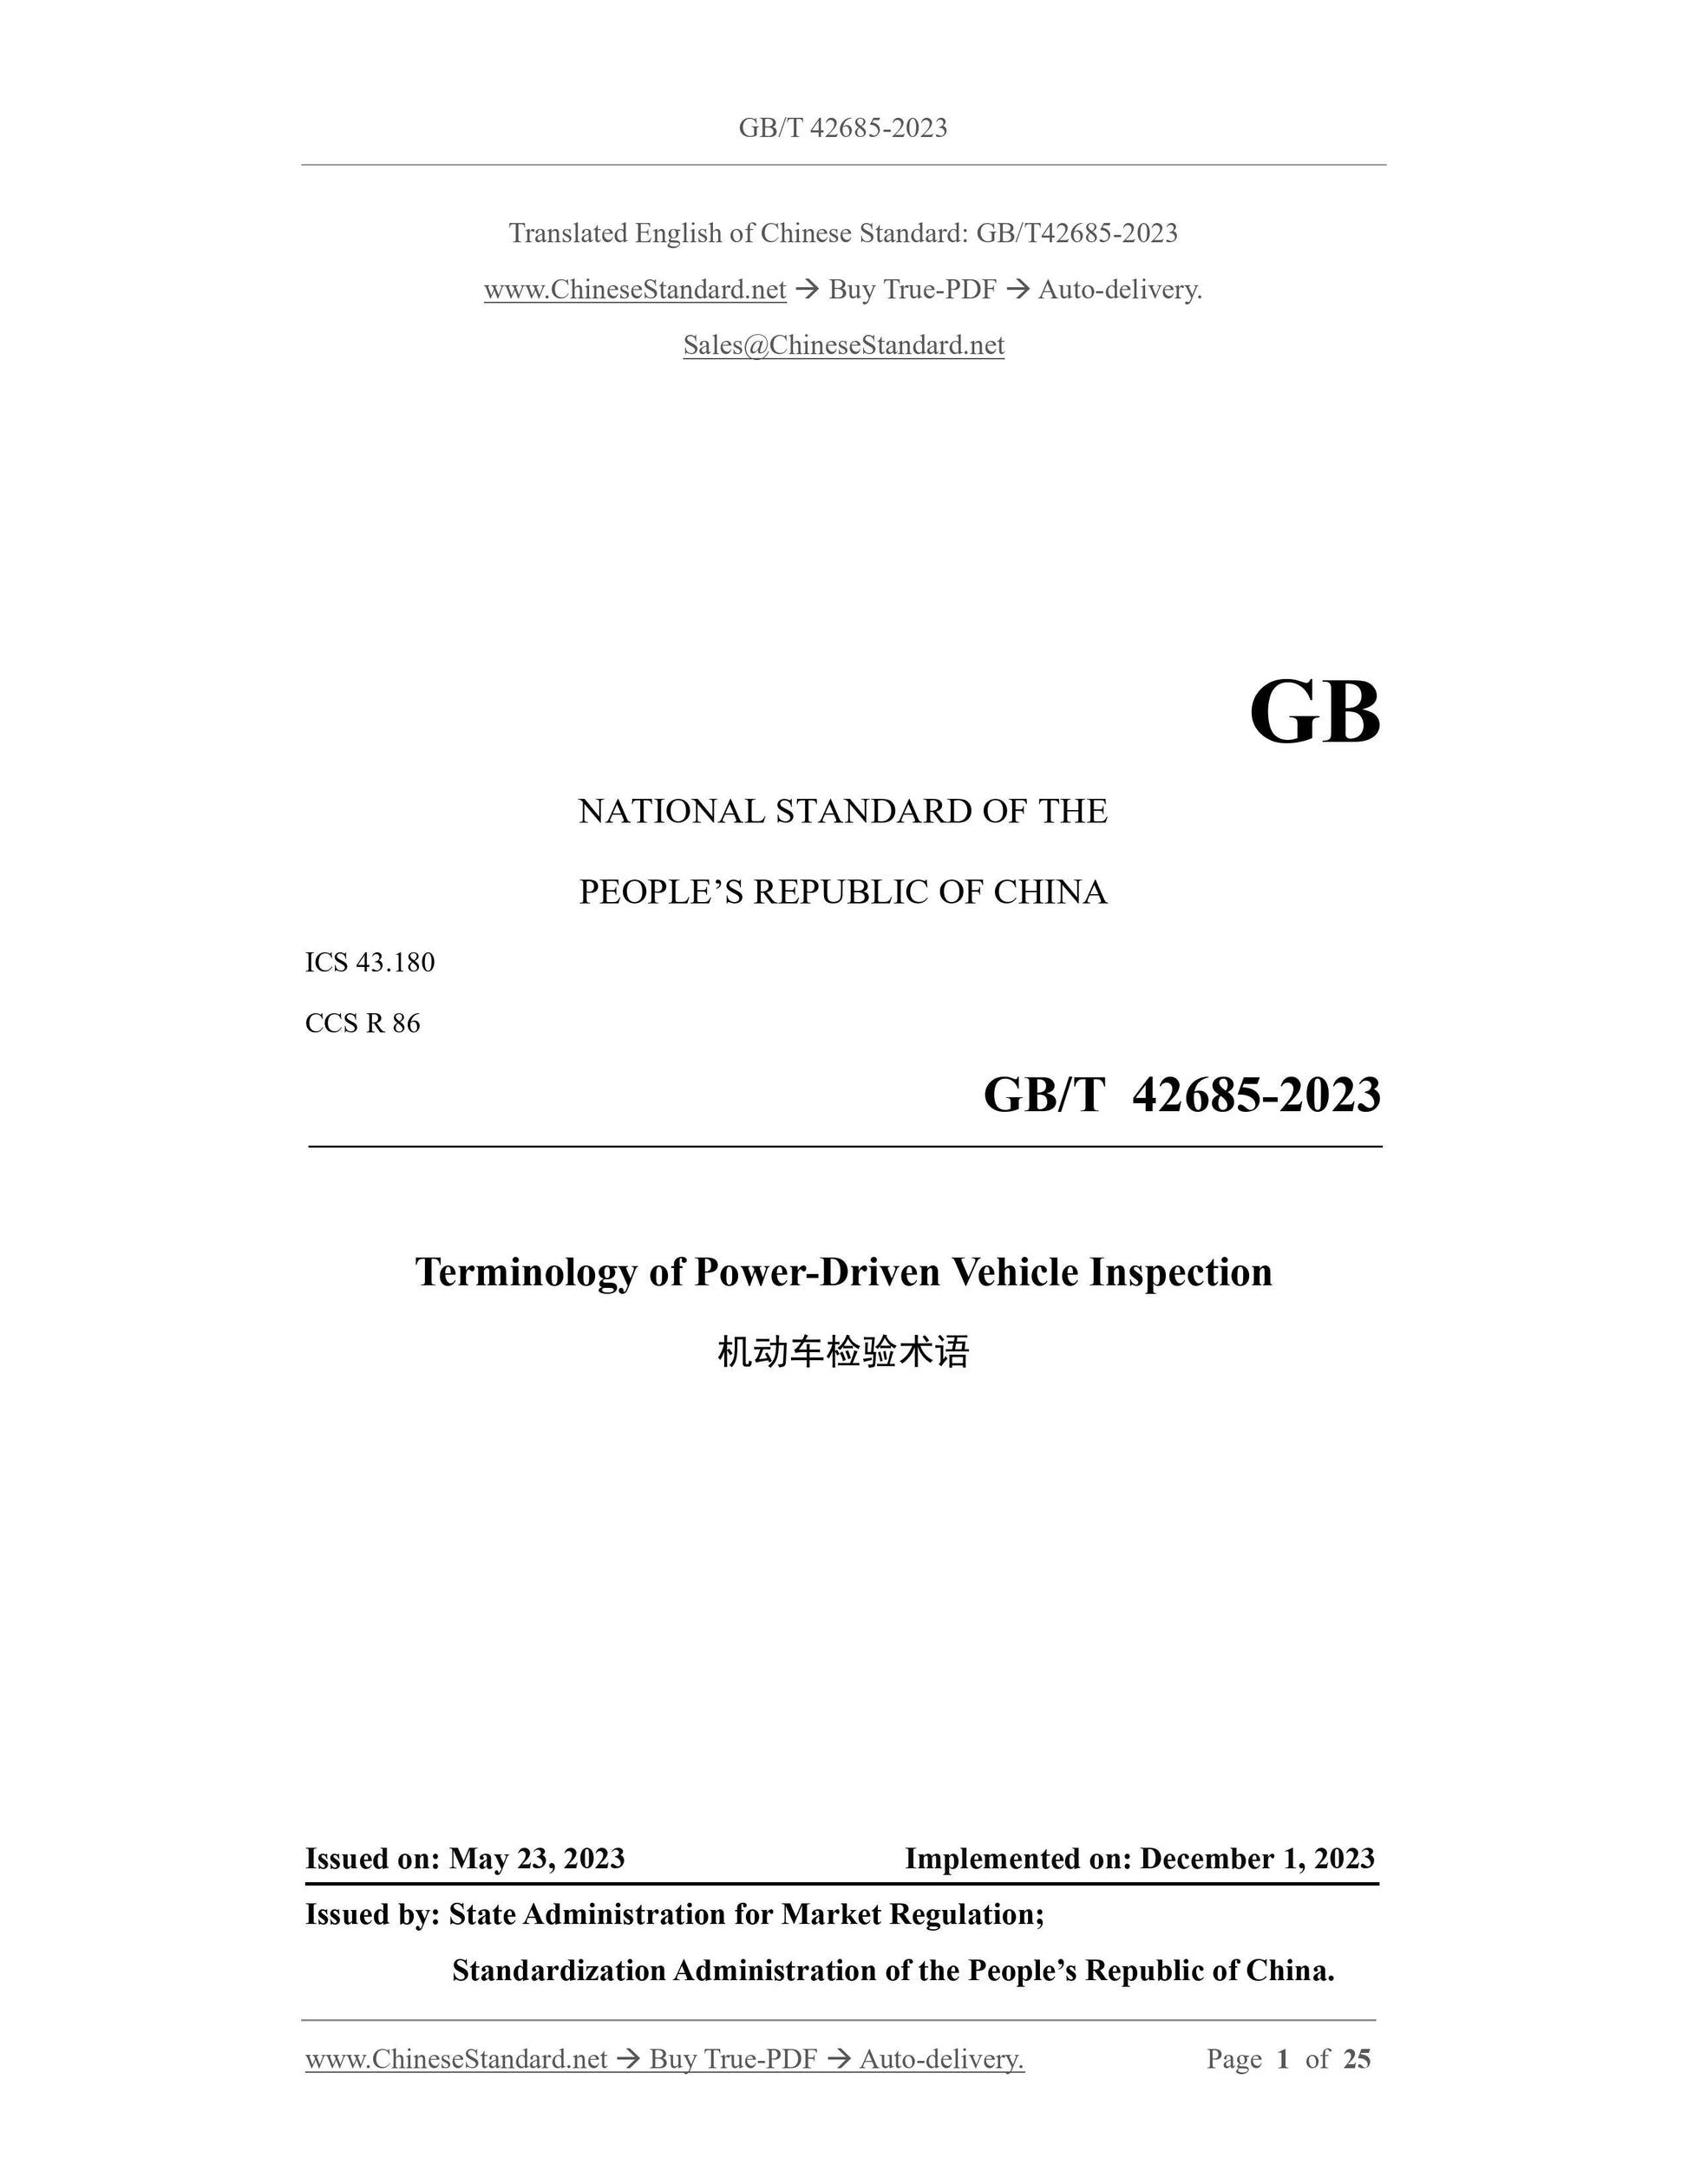 GB/T 42685-2023 Page 1